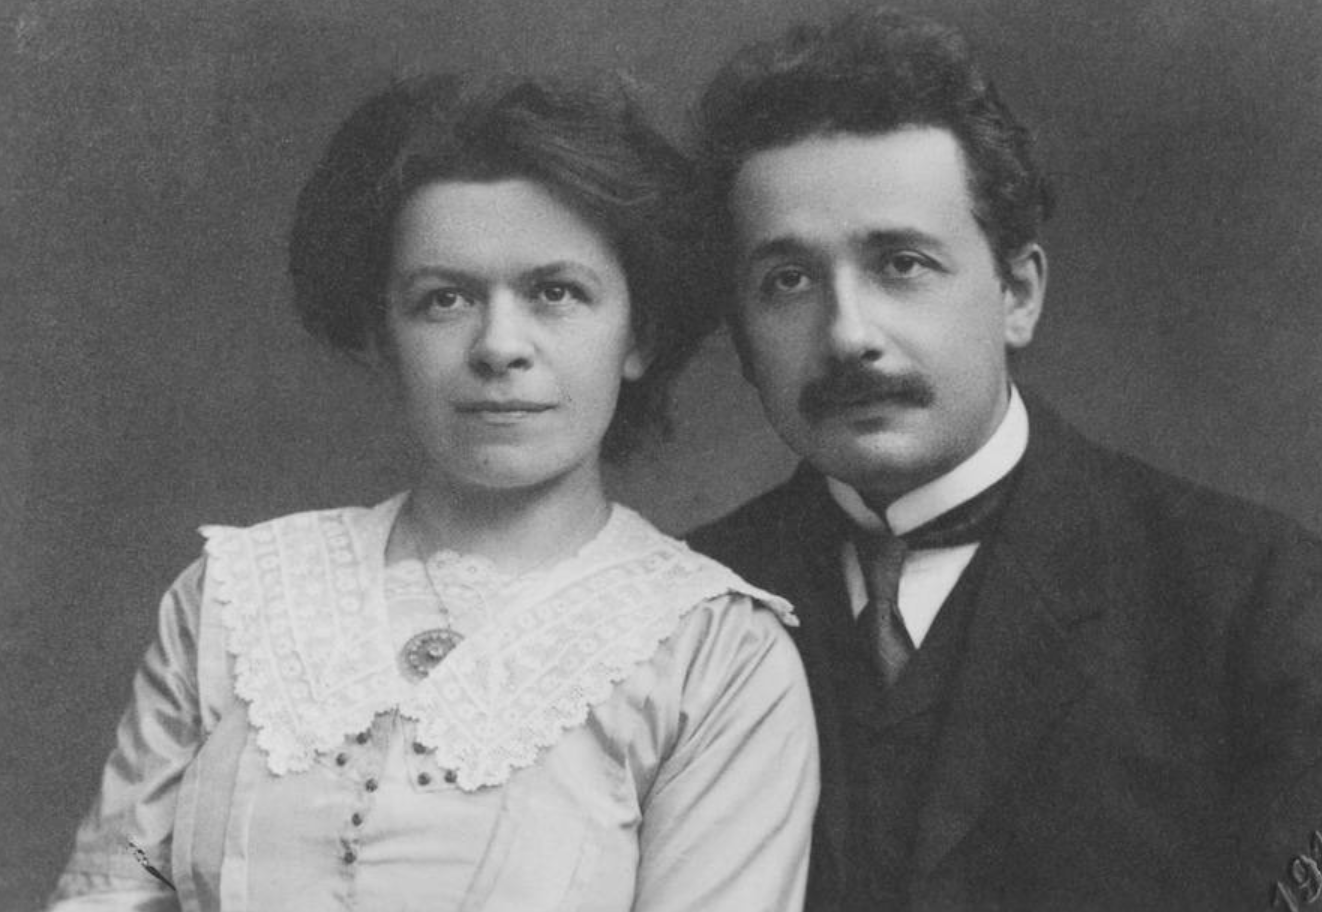 “Einstein wasn’t a great guy. Brilliant, sure, but kinda d—y in his personal life. He refused to marry his long time lover for years, even after she got pregnant. The child was assumed to be given up for adoption, but no record has ever been found. He and his wife, Mileva Marić, worked together on their research. People saw them do it. They made jokes about it at parties. He proudly told people that she did all his calculations. They only put his name on their work and he went on to claim all the credit - ignoring any work she had done. Part of their agreement was that she would get the Nobel prize money but he tried to prevent that. She raised two children - one schizophrenic - took care of the house and tutored to bring in extra money because he couldn’t get a job for a long time. He started getting more notoriety and then began an affair with his first cousin. He moved to a different country to be with his new hillbilly mistress. He divorced his wife and quickly married the new, younger model. He had rules she had to abide by, such as leaving the room immediately when told and not expecting or asking for any sort of affection except when necessary for appearances sake. Elsa, his second wife, was dying and he worked nonstop because he didn’t know what to do (I guess). She was basically abandoned her last few months. He cheated on both his wives, numerous times. Ignored his children. Oh - and he was pretty into his second wife’s daughter and thought about marrying her instead.”